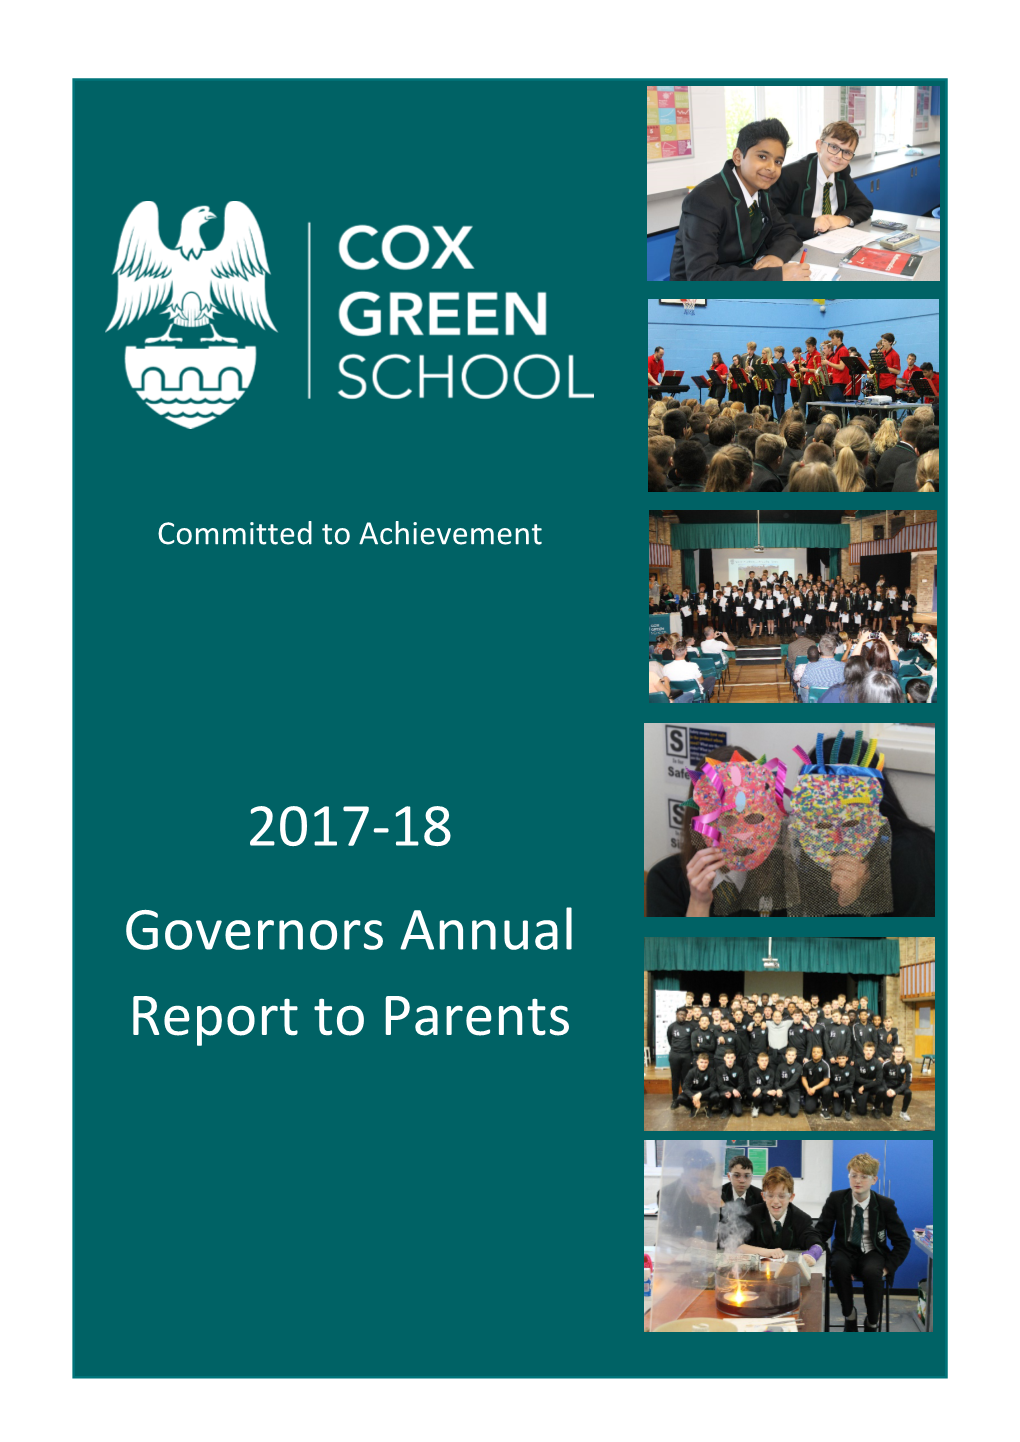 2017-18 Governors Annual Report to Parents